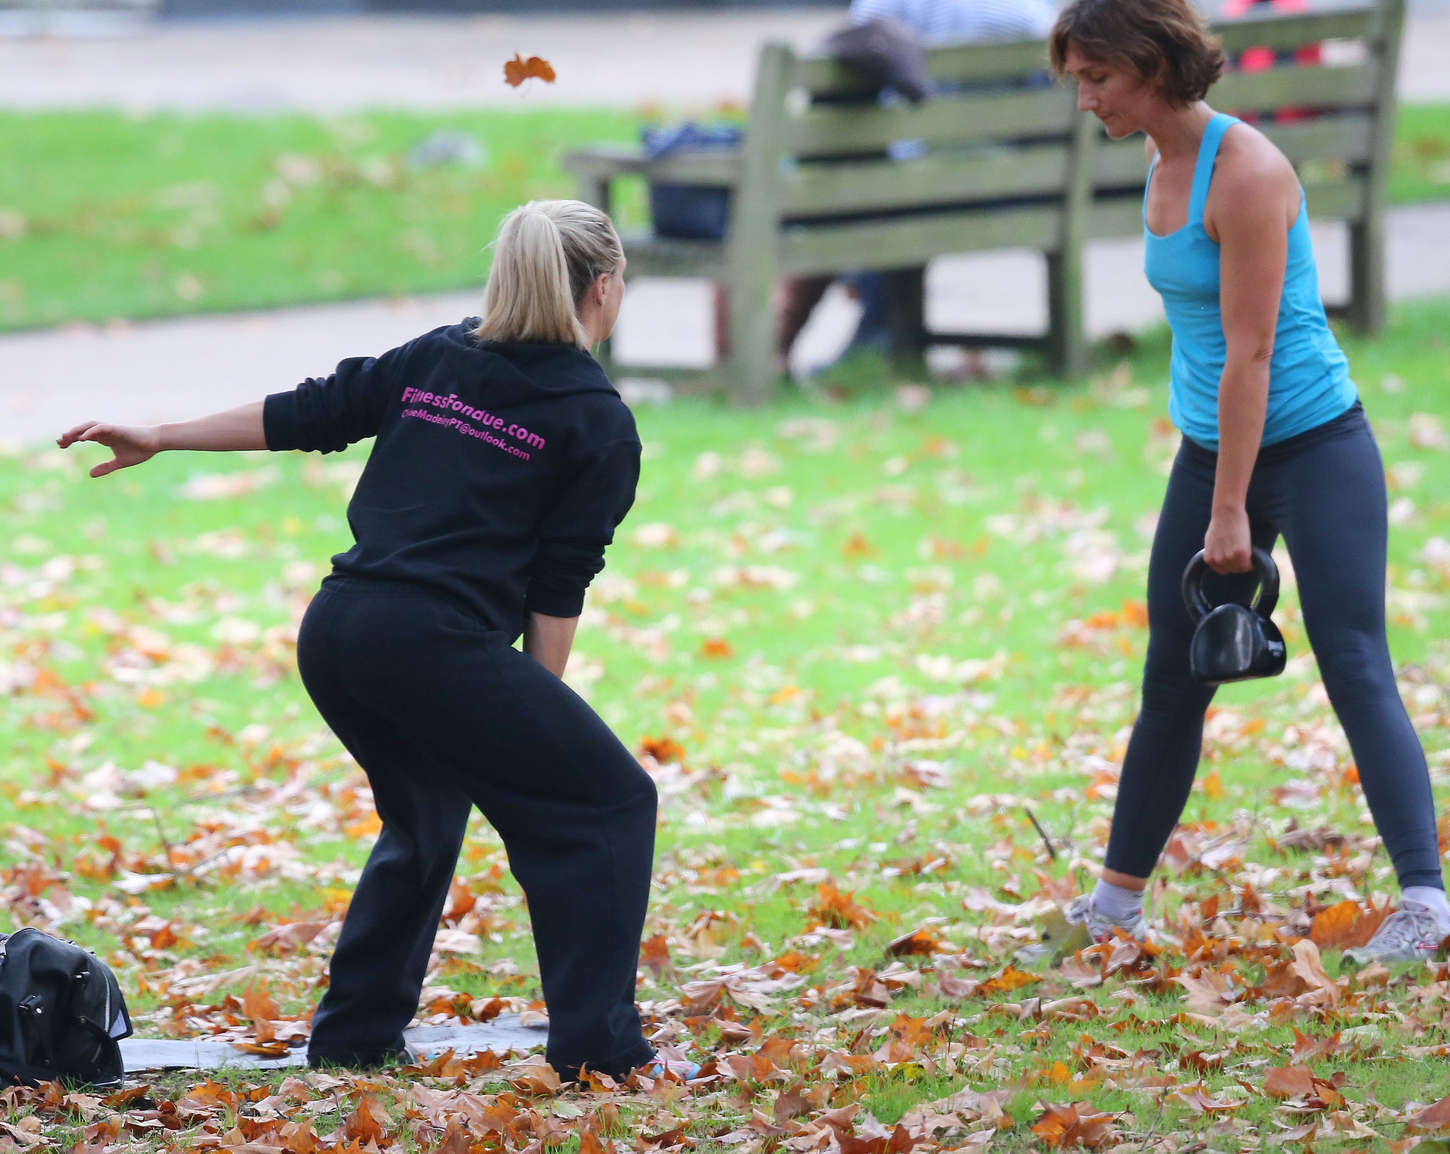 Chloe Madeley Personal trainer workout in a North London Park-1